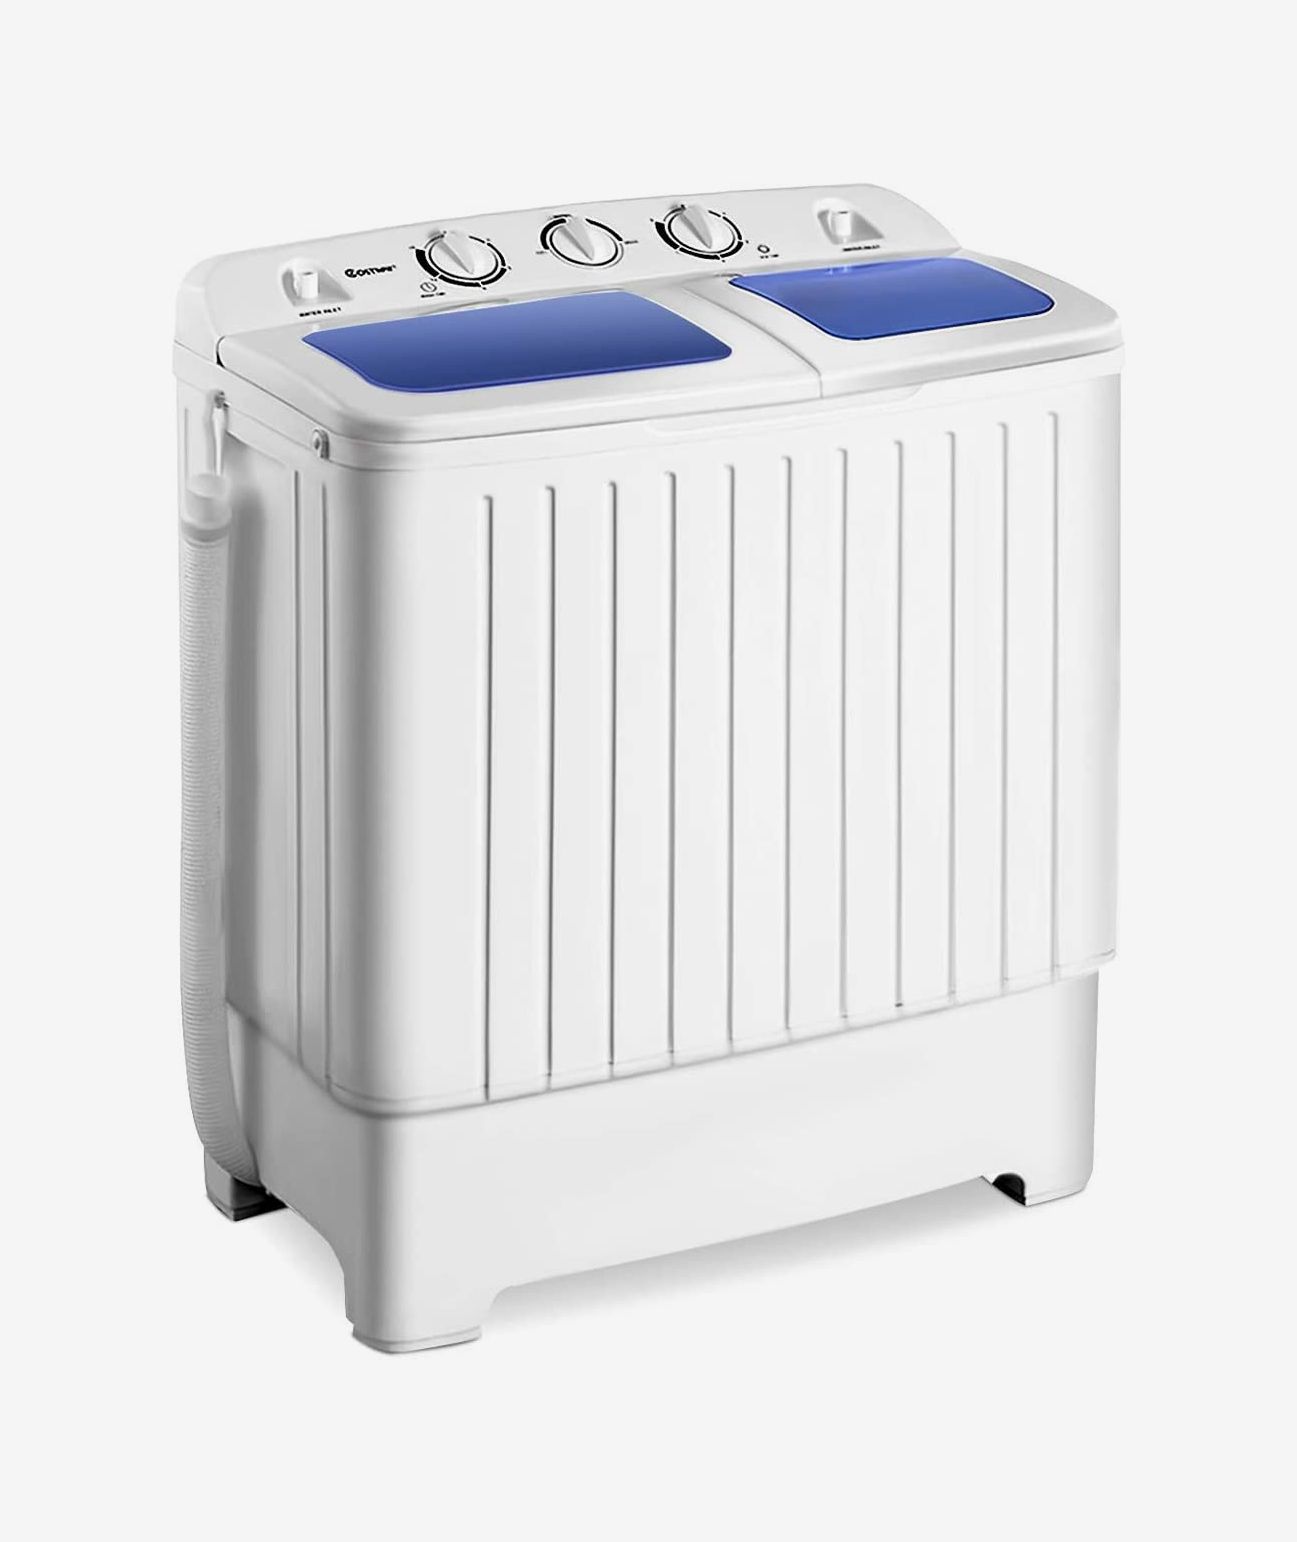 Top 10: Best Portable Washers of 2021 / Compact Washing Machine / Automatic  Laundry Washer & Dryer 